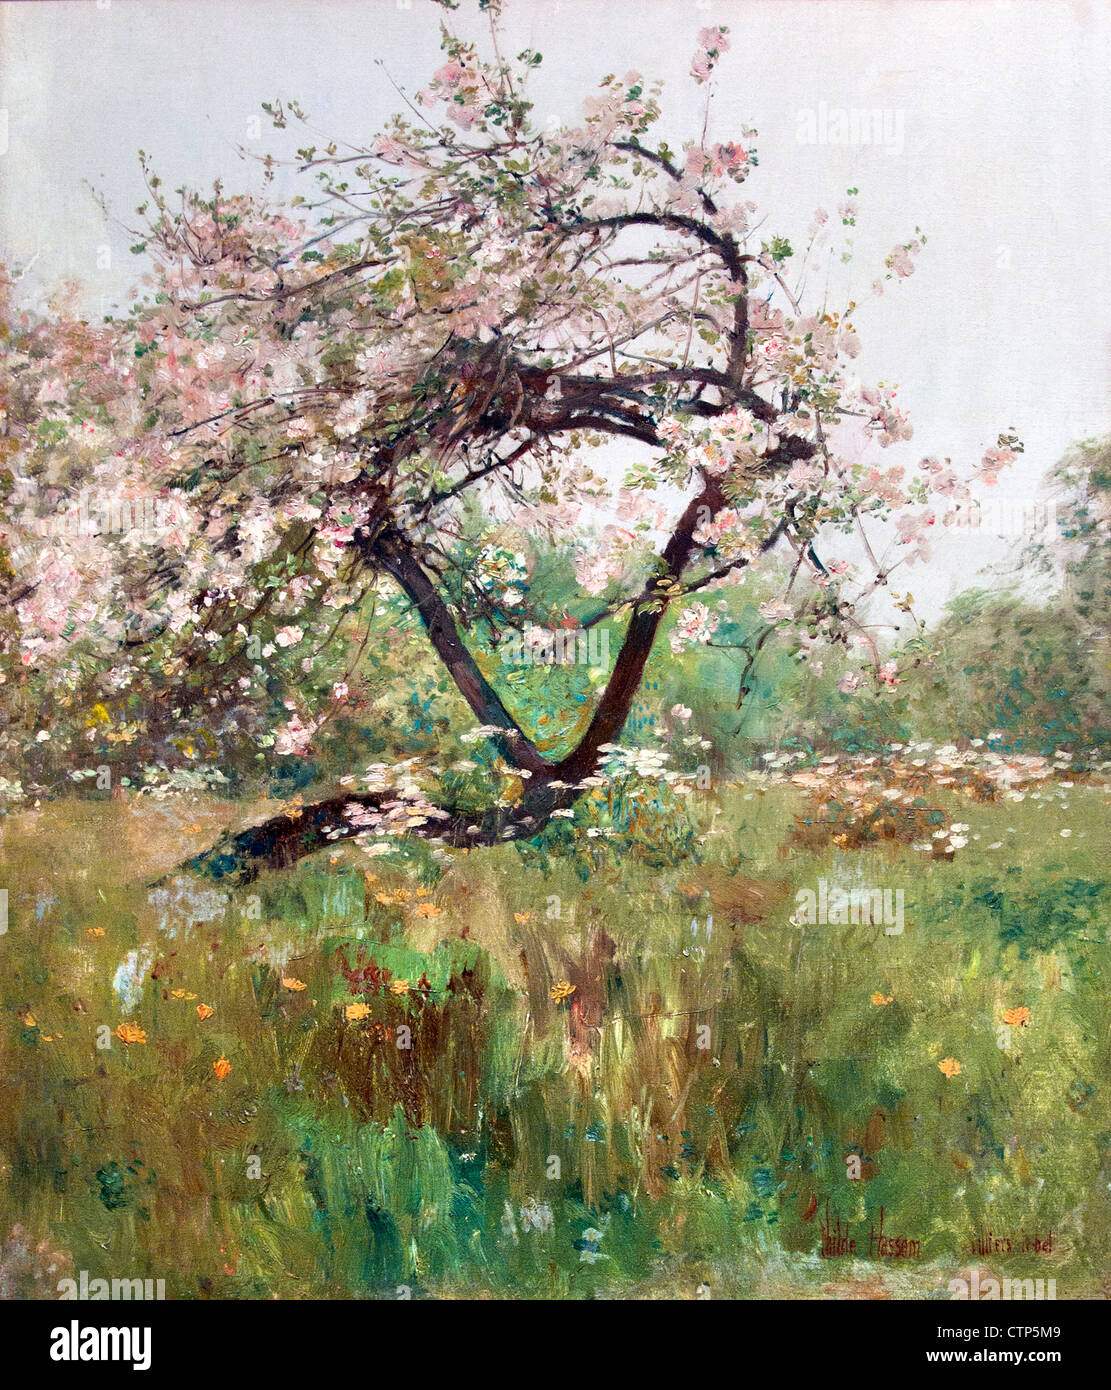 Peach Blossoms Villiers le Bel 1887 Childe Hassam American United States of America Stock Photo